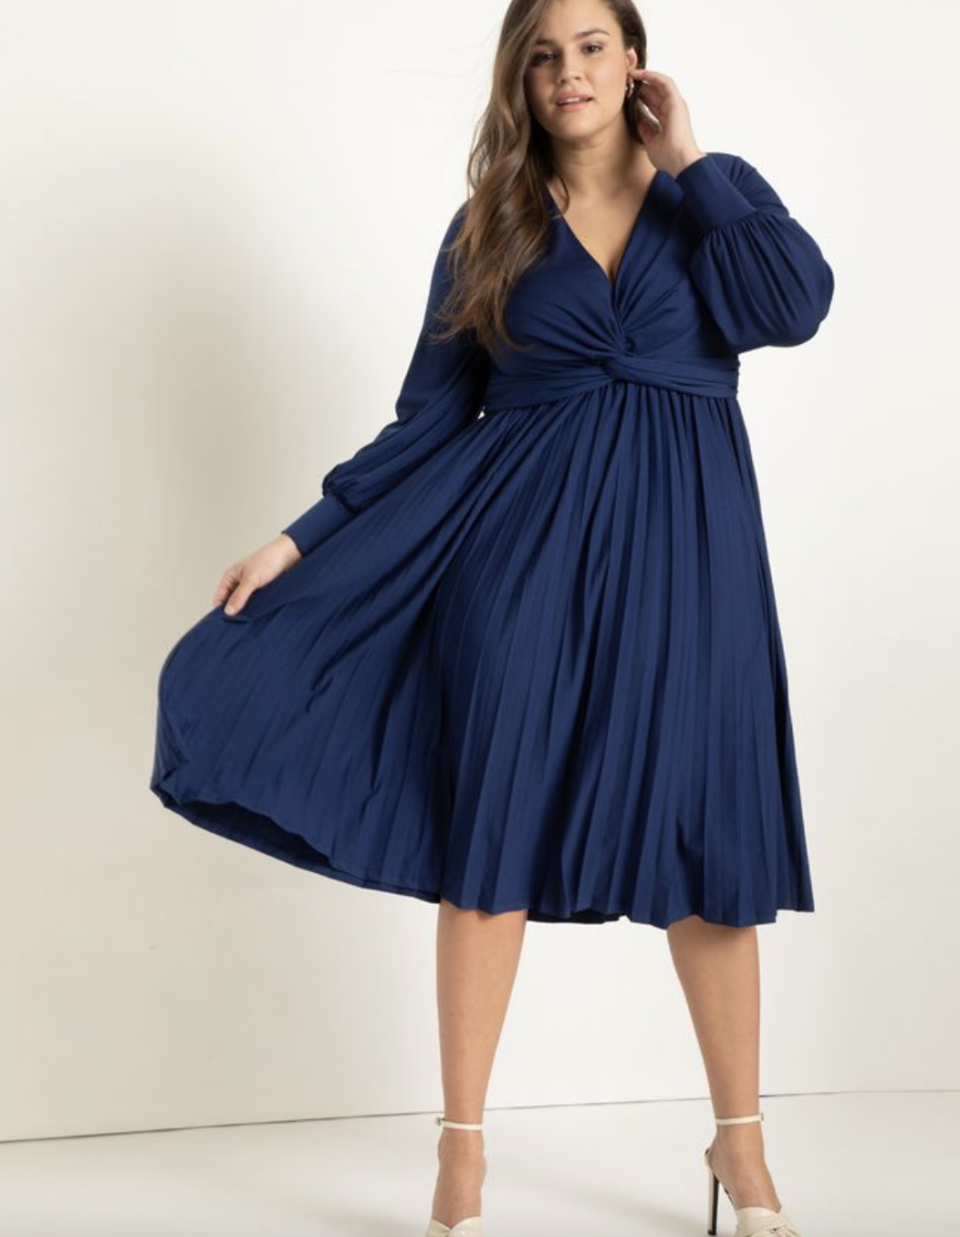 plus size brunette model in long sleeve navy blue Knot Front Pleated Skirt Dress (Photo via Eloquii)